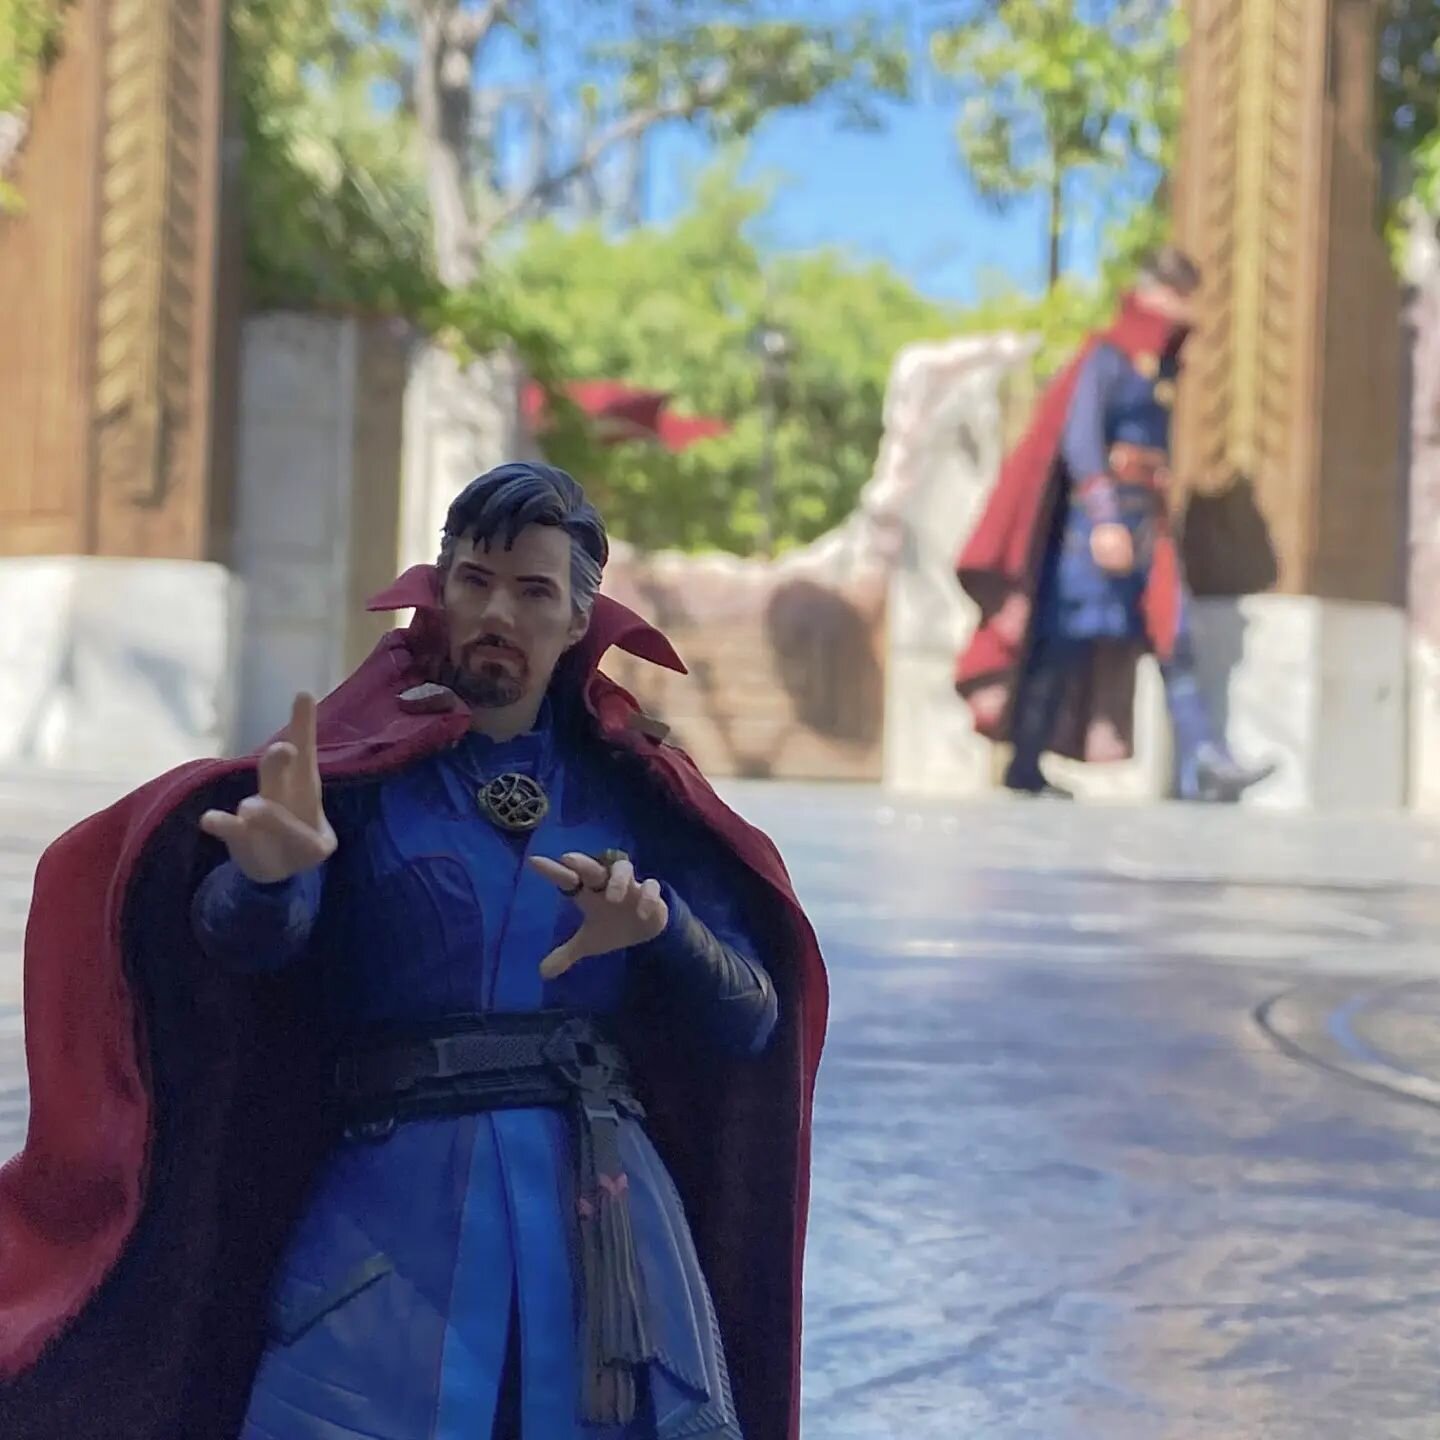 Dr Strange in avengers campus of madness. 
.
While I was taking this shot, Dr Strange came up and gave me some composition tips (swipe to second pic). I showed him the shot and he shook my hand! I was giddy, like being a kid again. I was also very sw